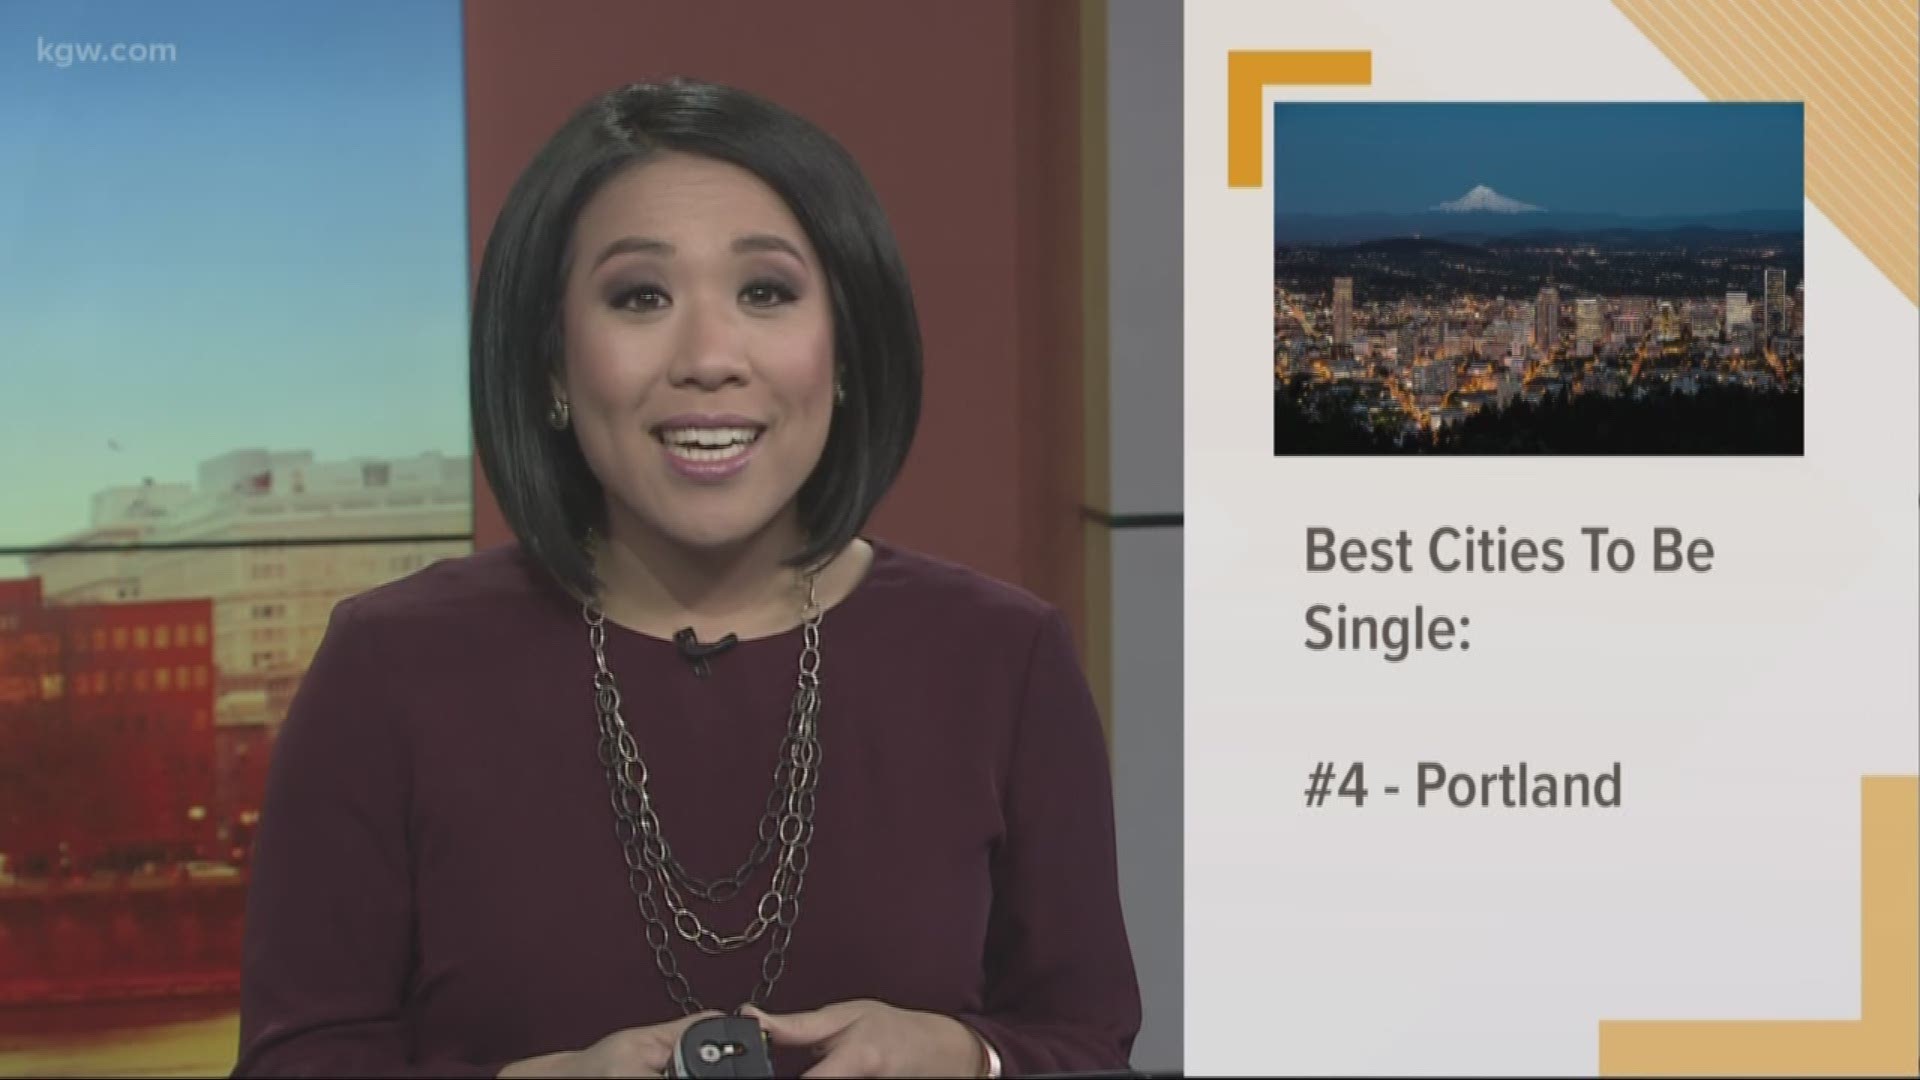 The City of Roses is the City of Dating. Portland is No. 4 on the Top 5 cities to be single